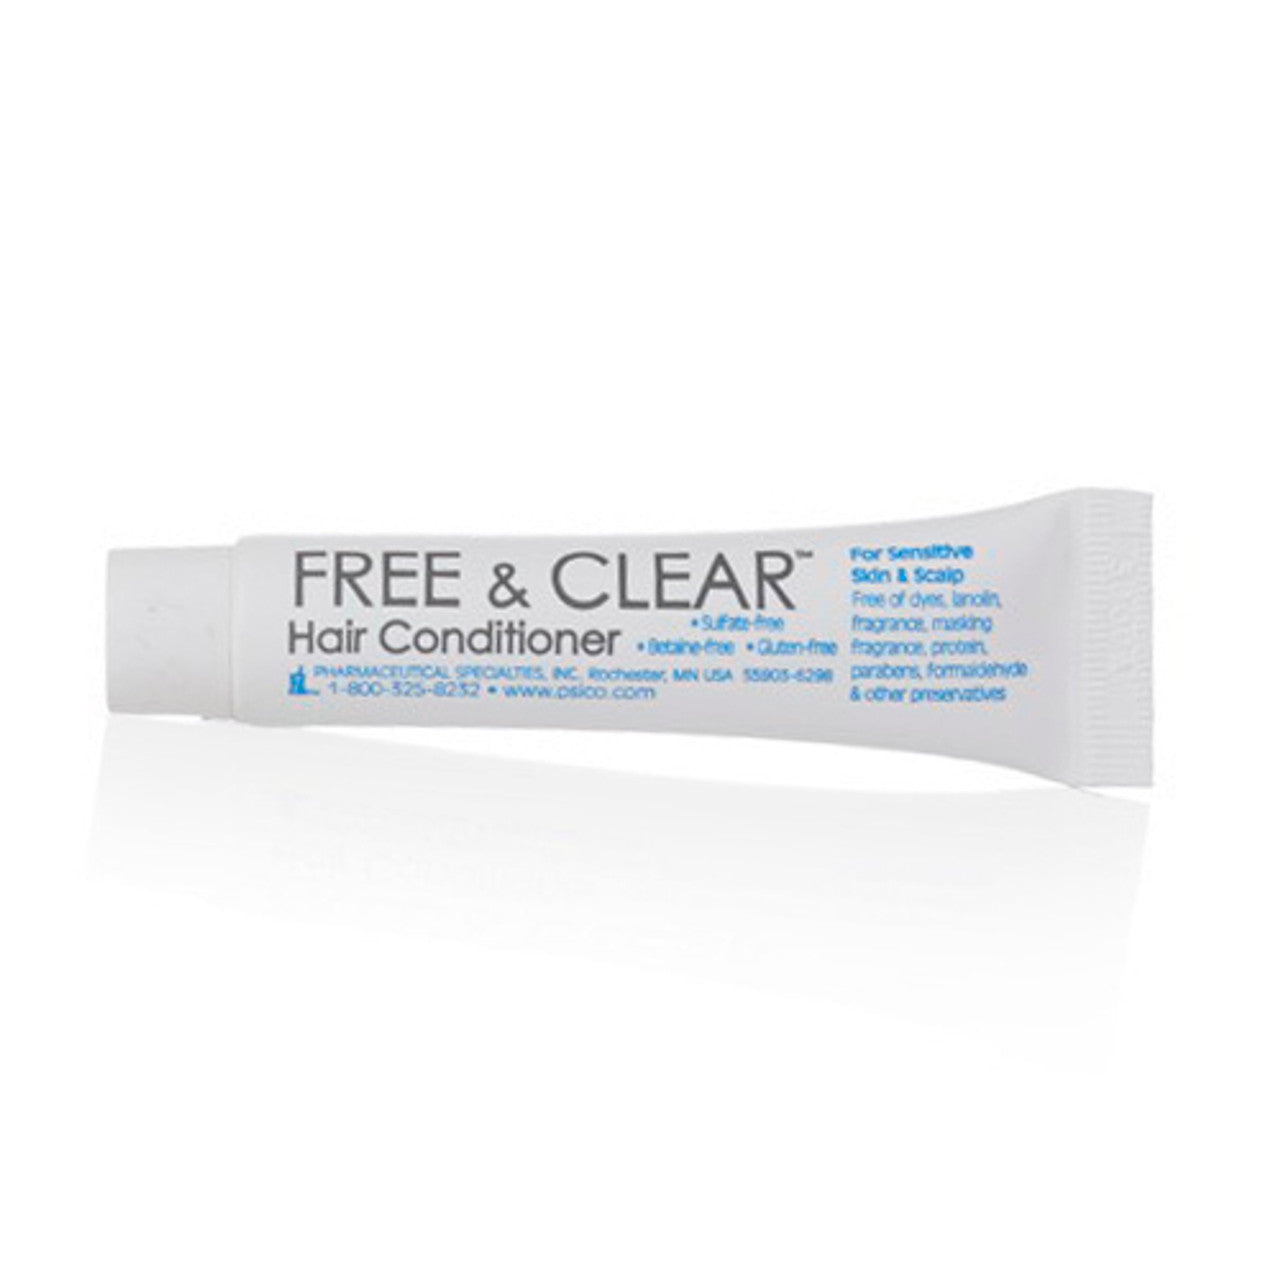 Free And Clear Hair Conditioner For Sensitive Skin And Scalp Travel Pack 0.25 Oz